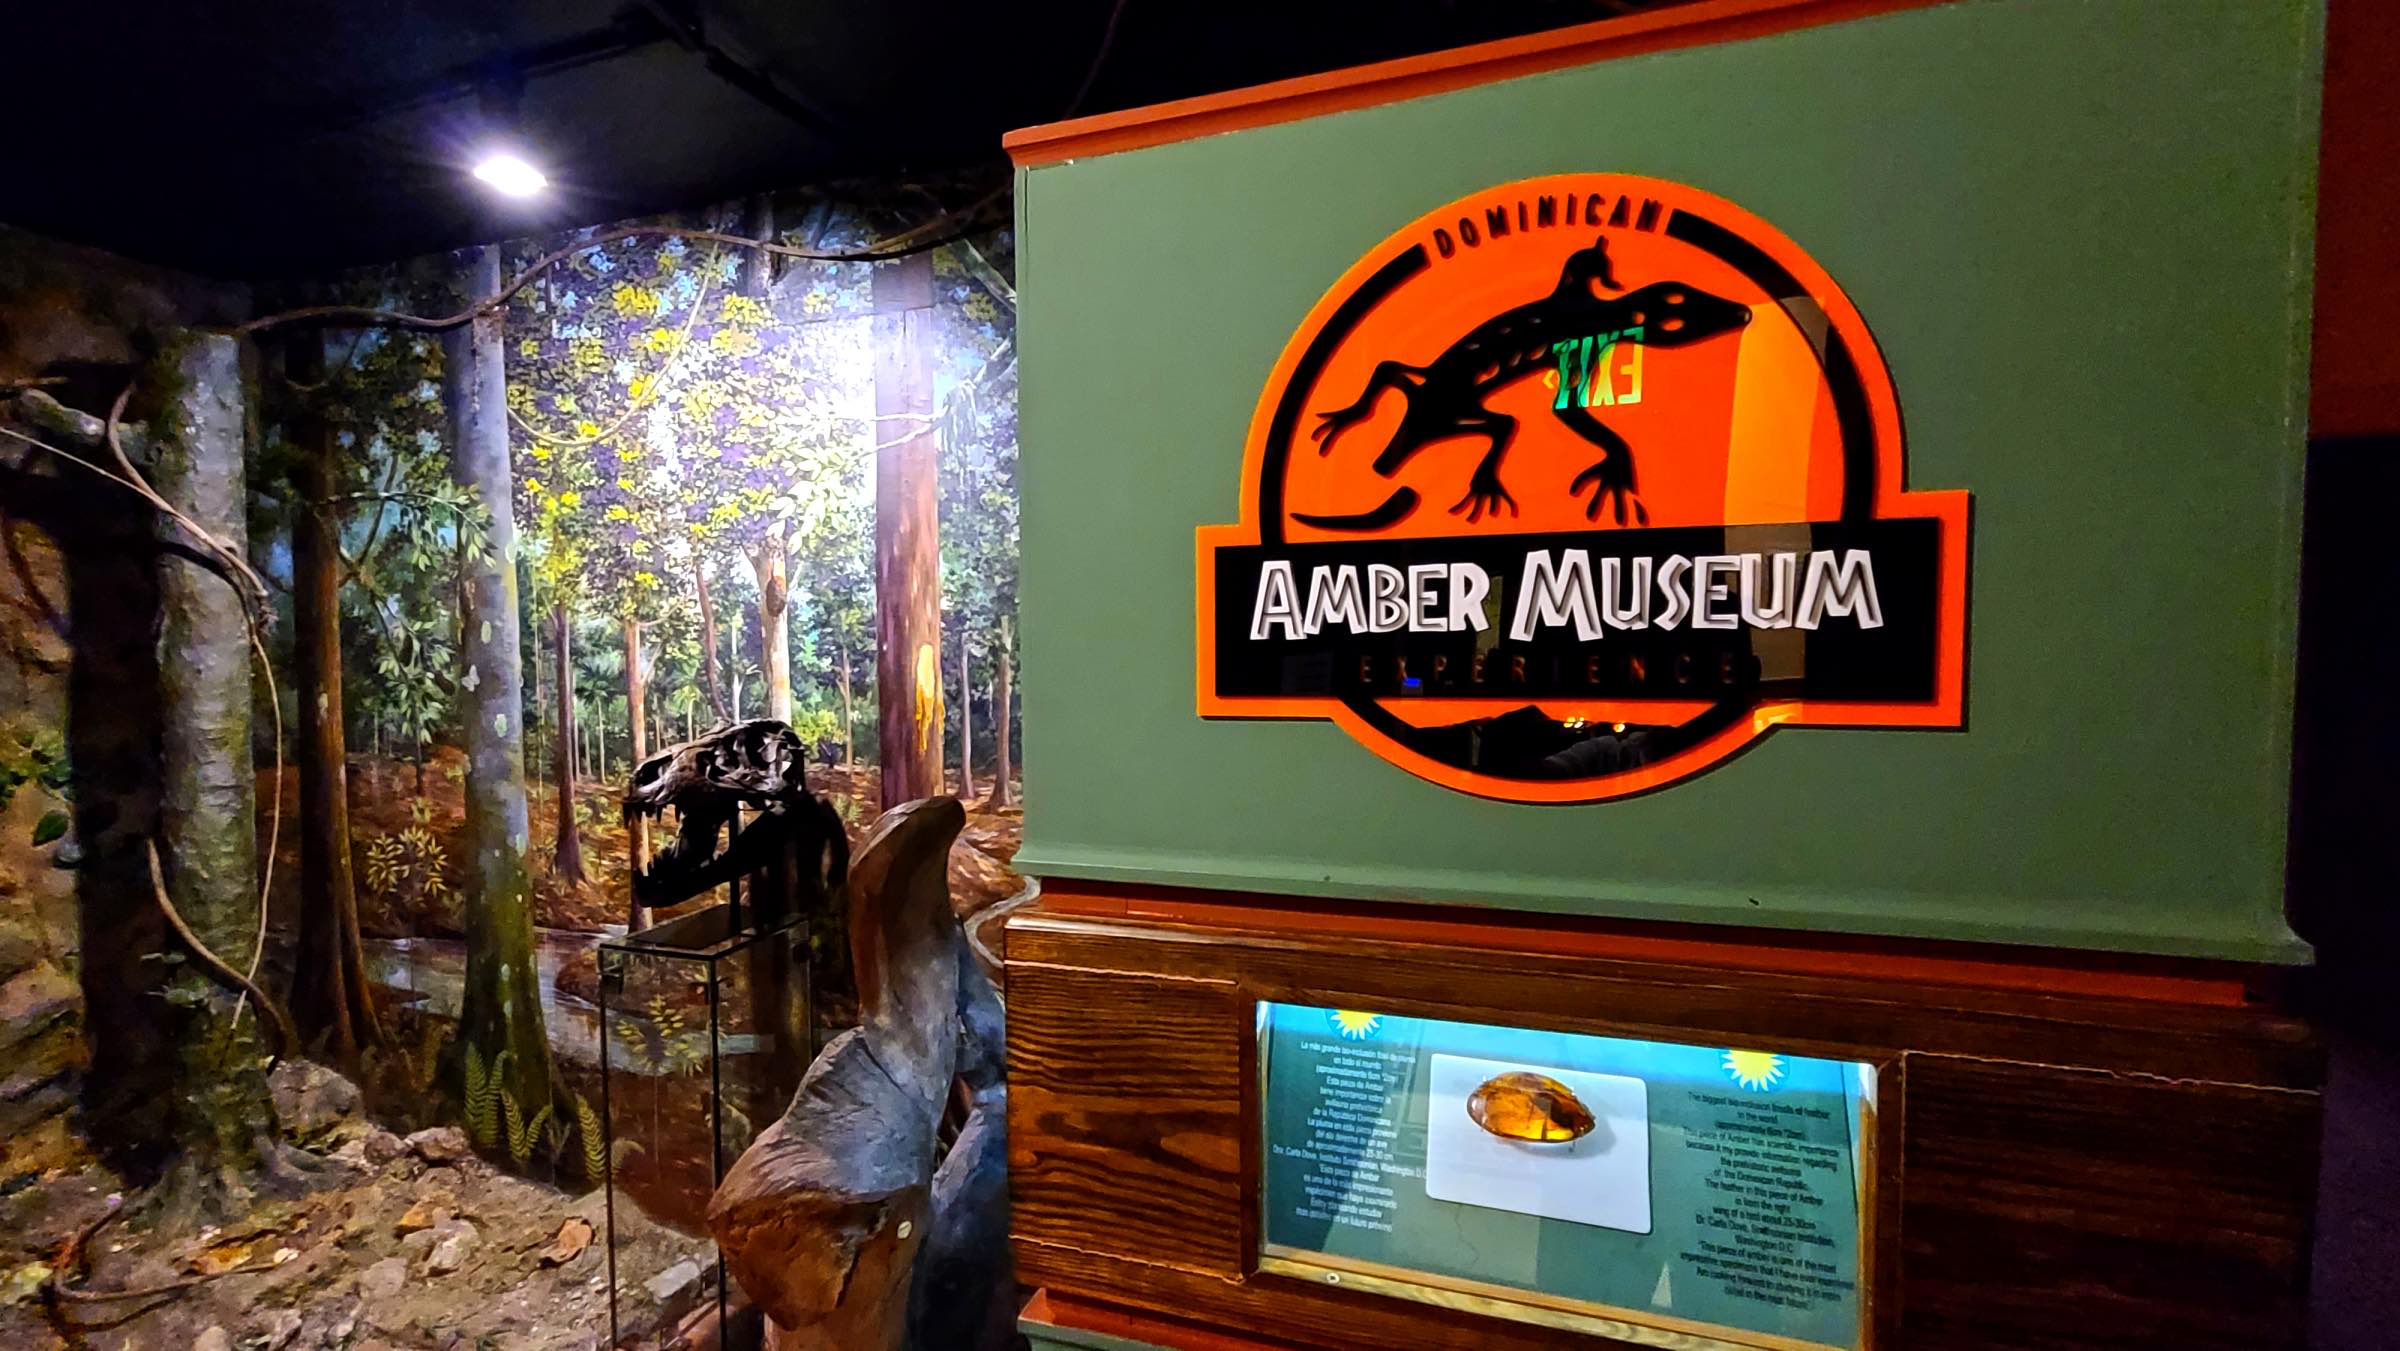 The Amber Museum of Puerto Plata